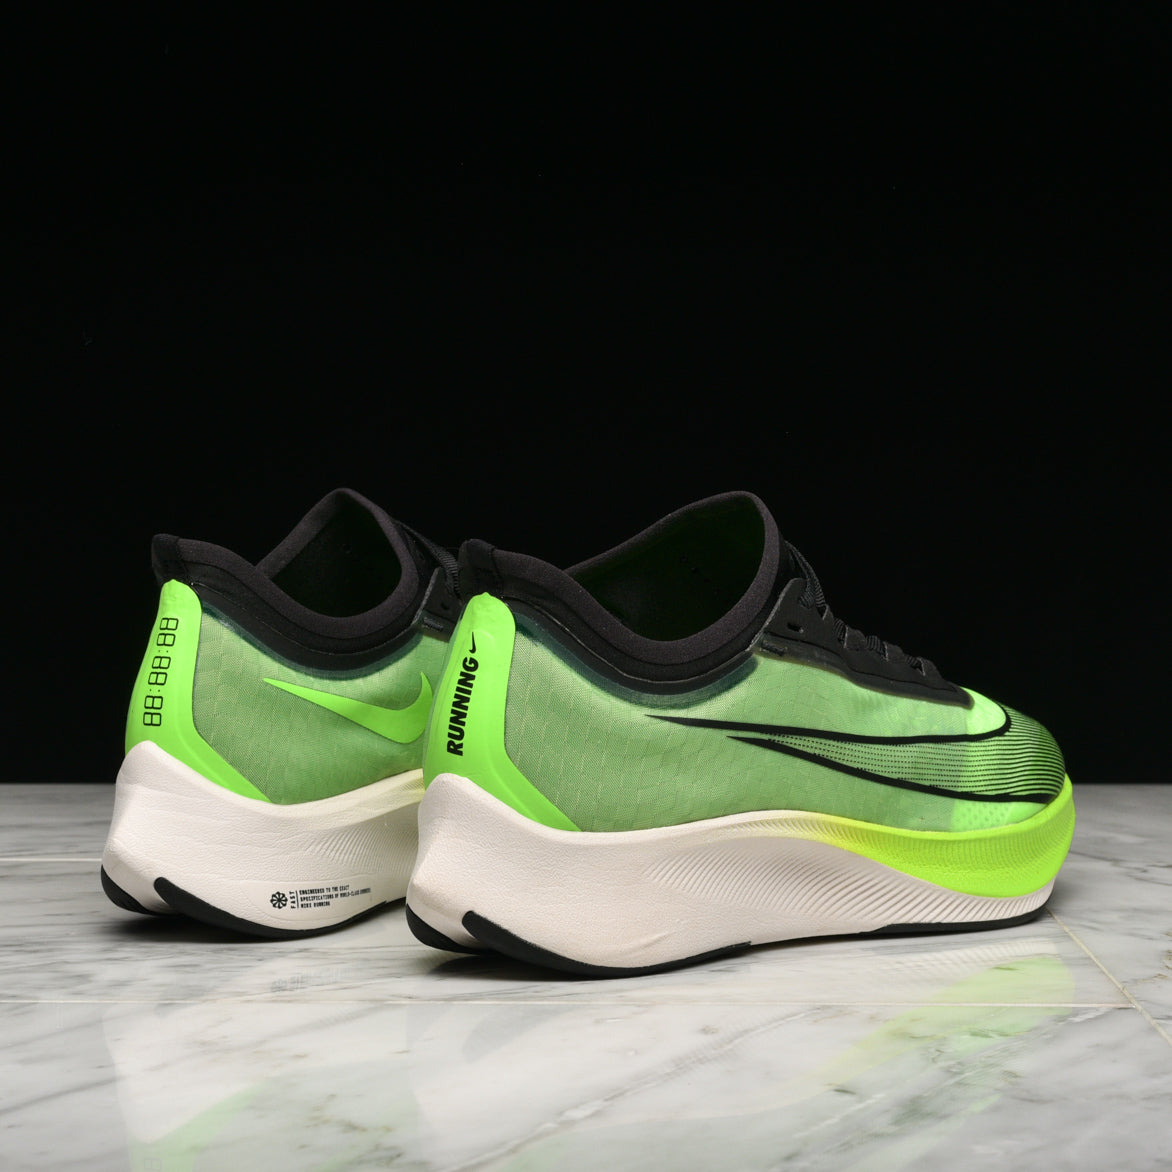 ZOOM FLY 3 - ELECTRIC GREEN / BLACK 